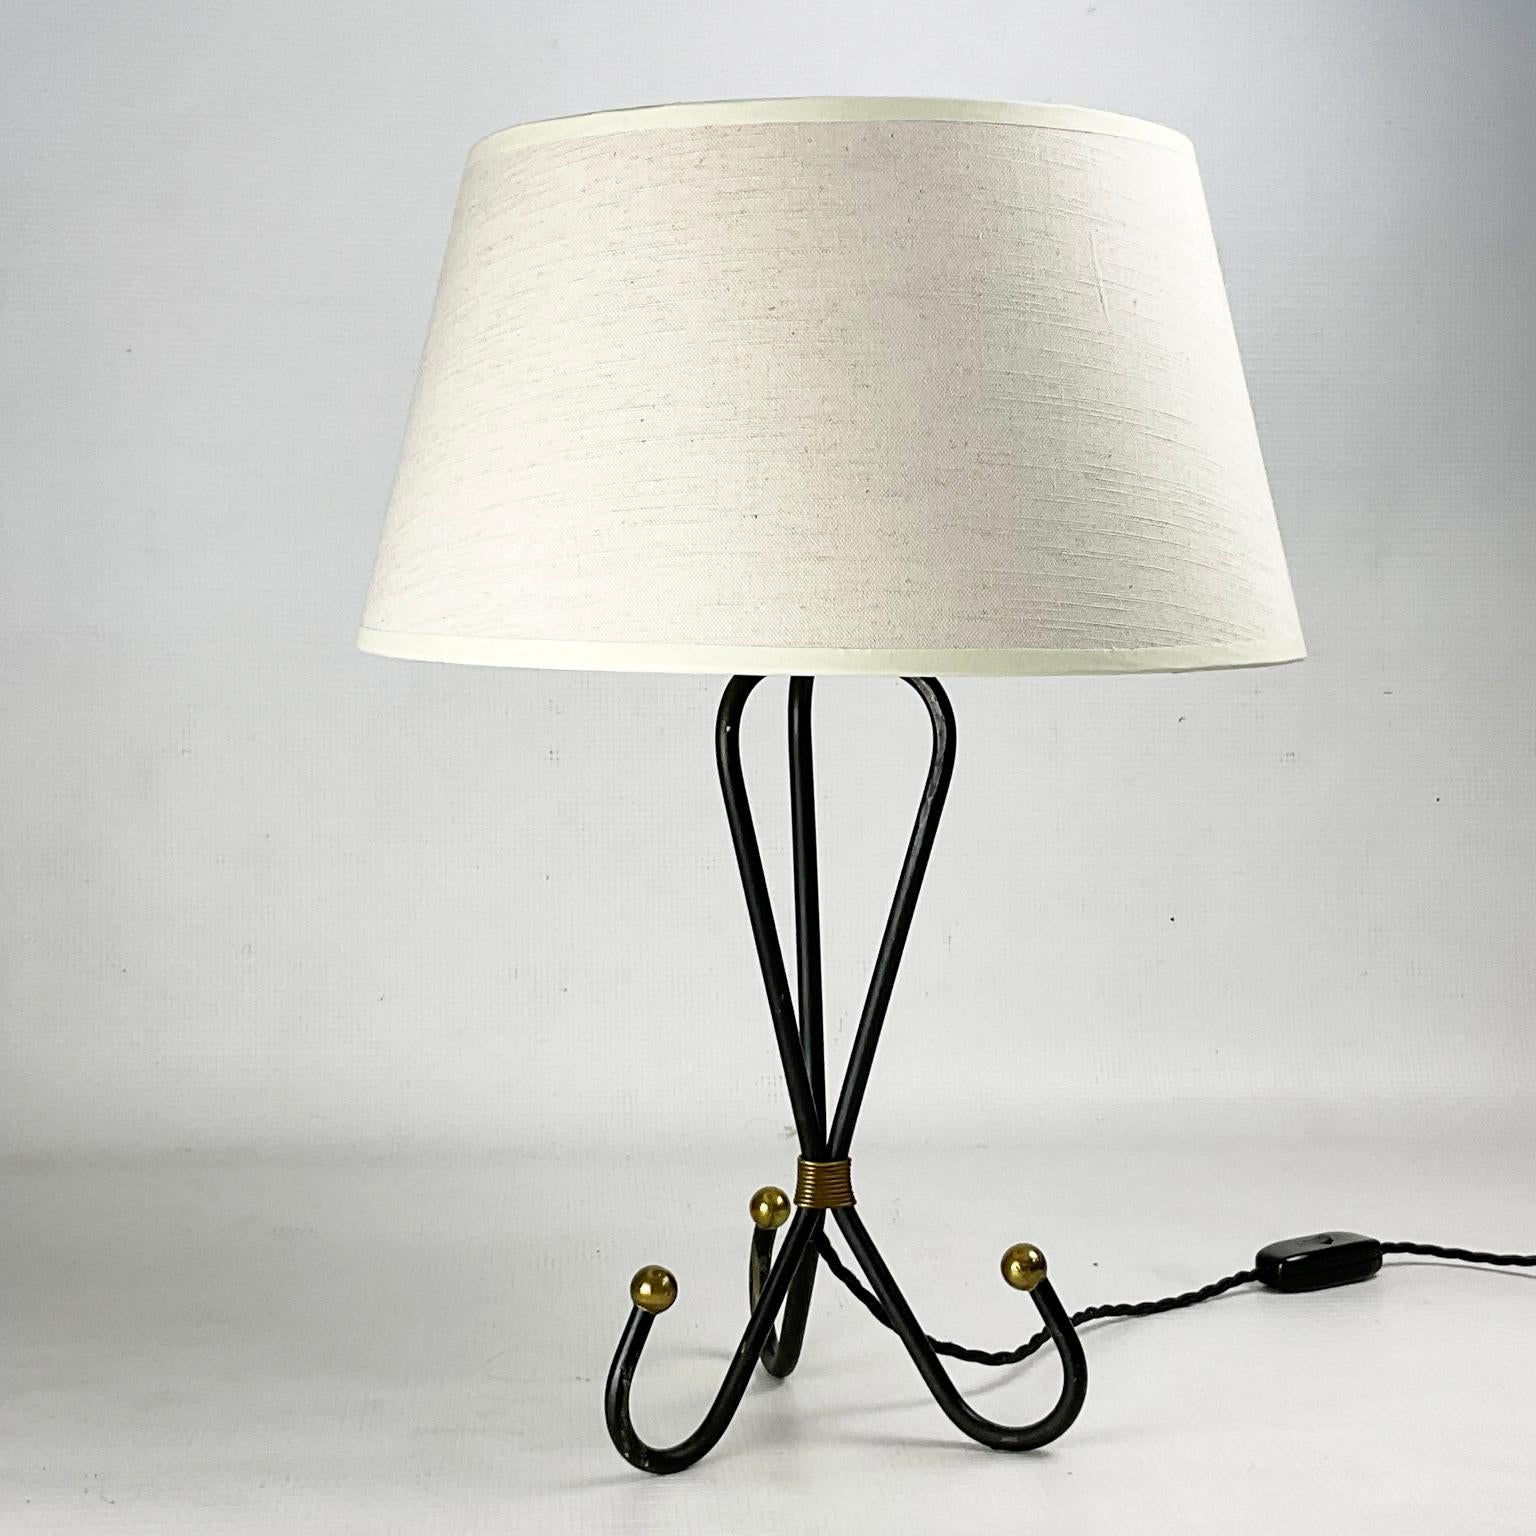 Cast 1950s Table Lamp Wrought Iron and Brass Finish